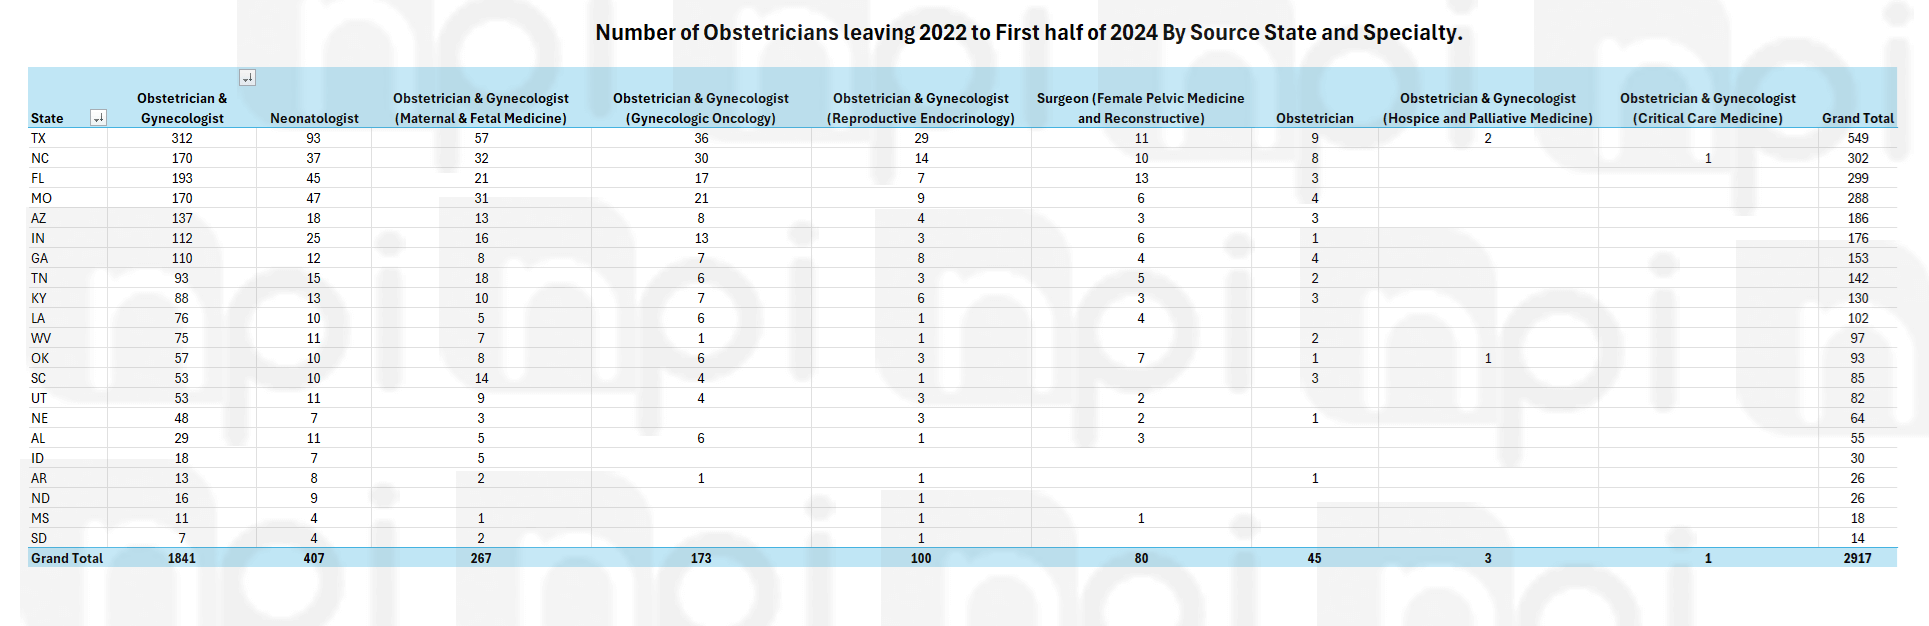 Table showing the specific specialties of the OB-GYNs who have left states with restrictive reproductive health laws from 2022 to the first half of 2024